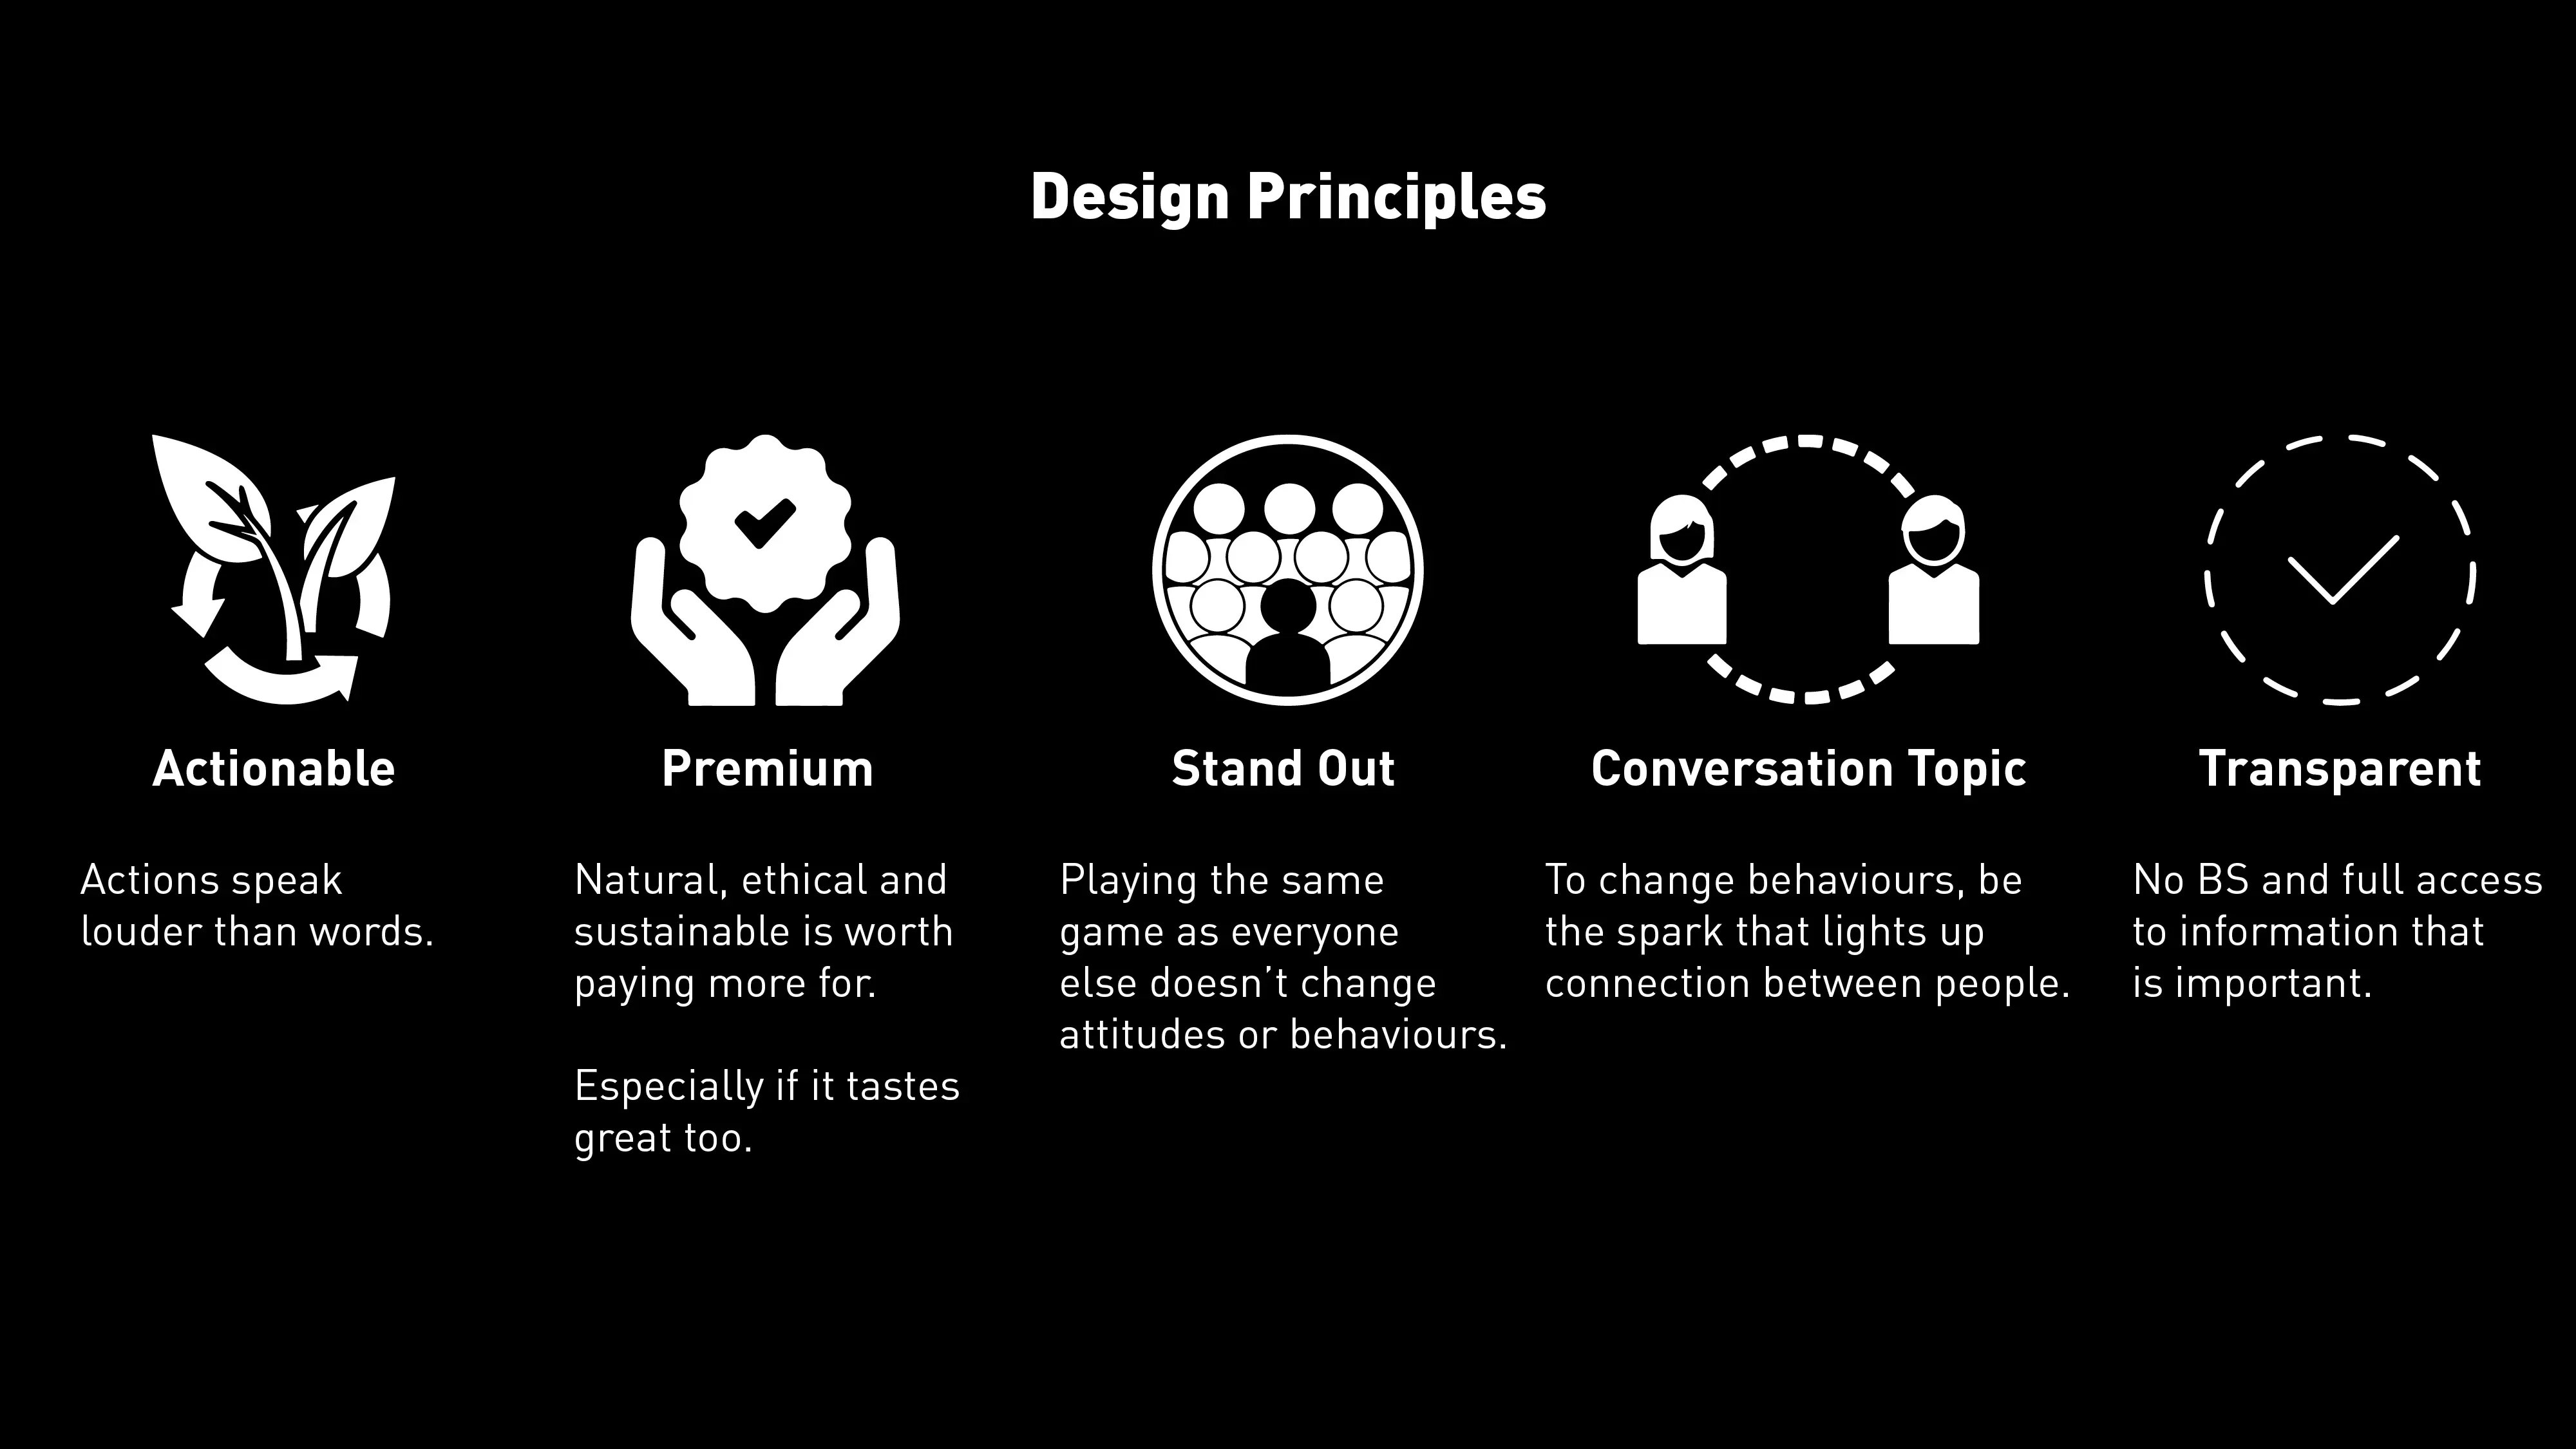 A slide of the design principles behind the system: Actionable, Premium, Stand Out, Conversation Topic & Transparent.